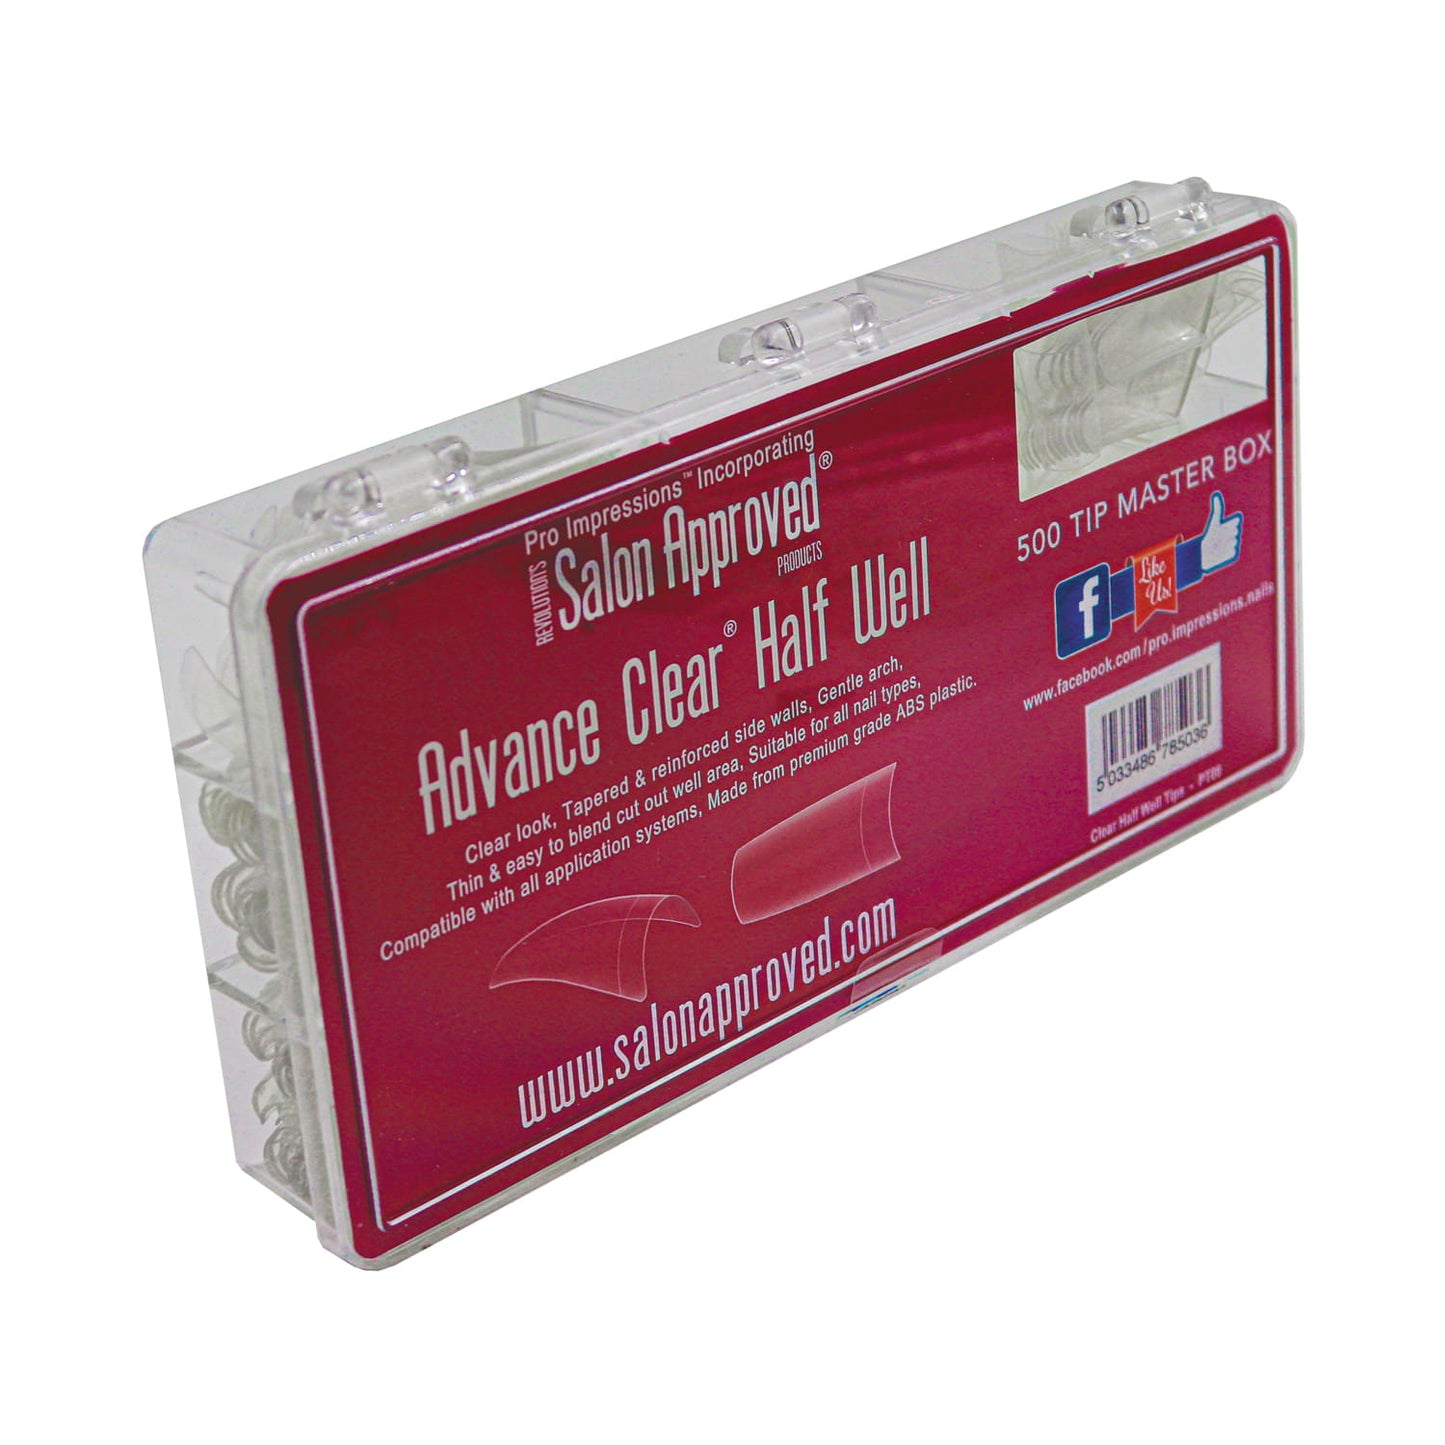 Advance Clear® Cut Out / Half Well Nail Tips